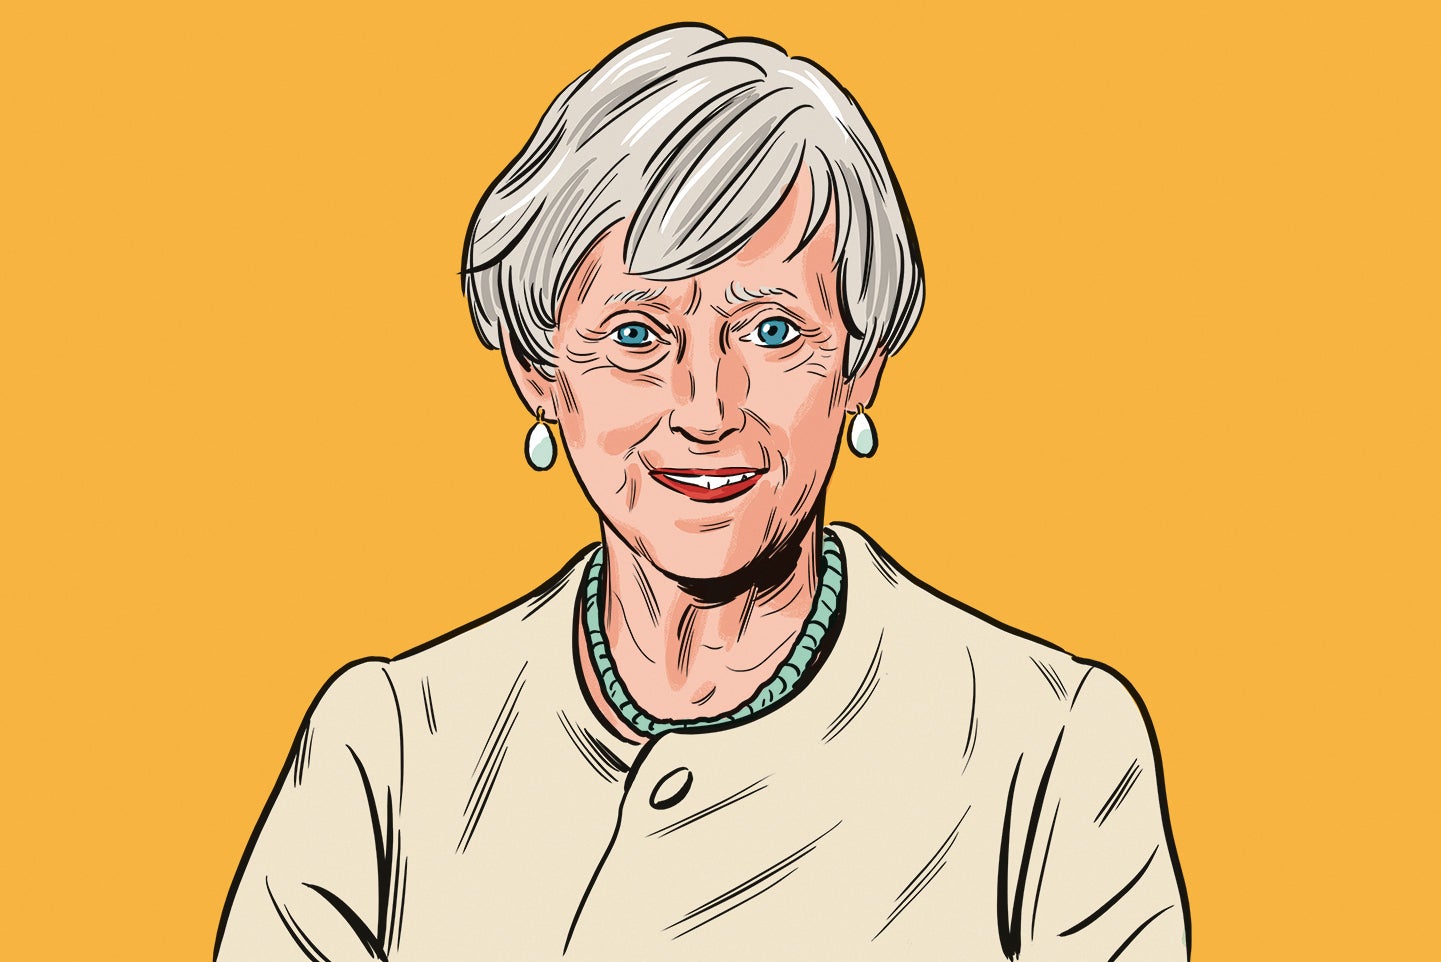 Stella Rimington Q&A: “In another life I’d be home secretary”